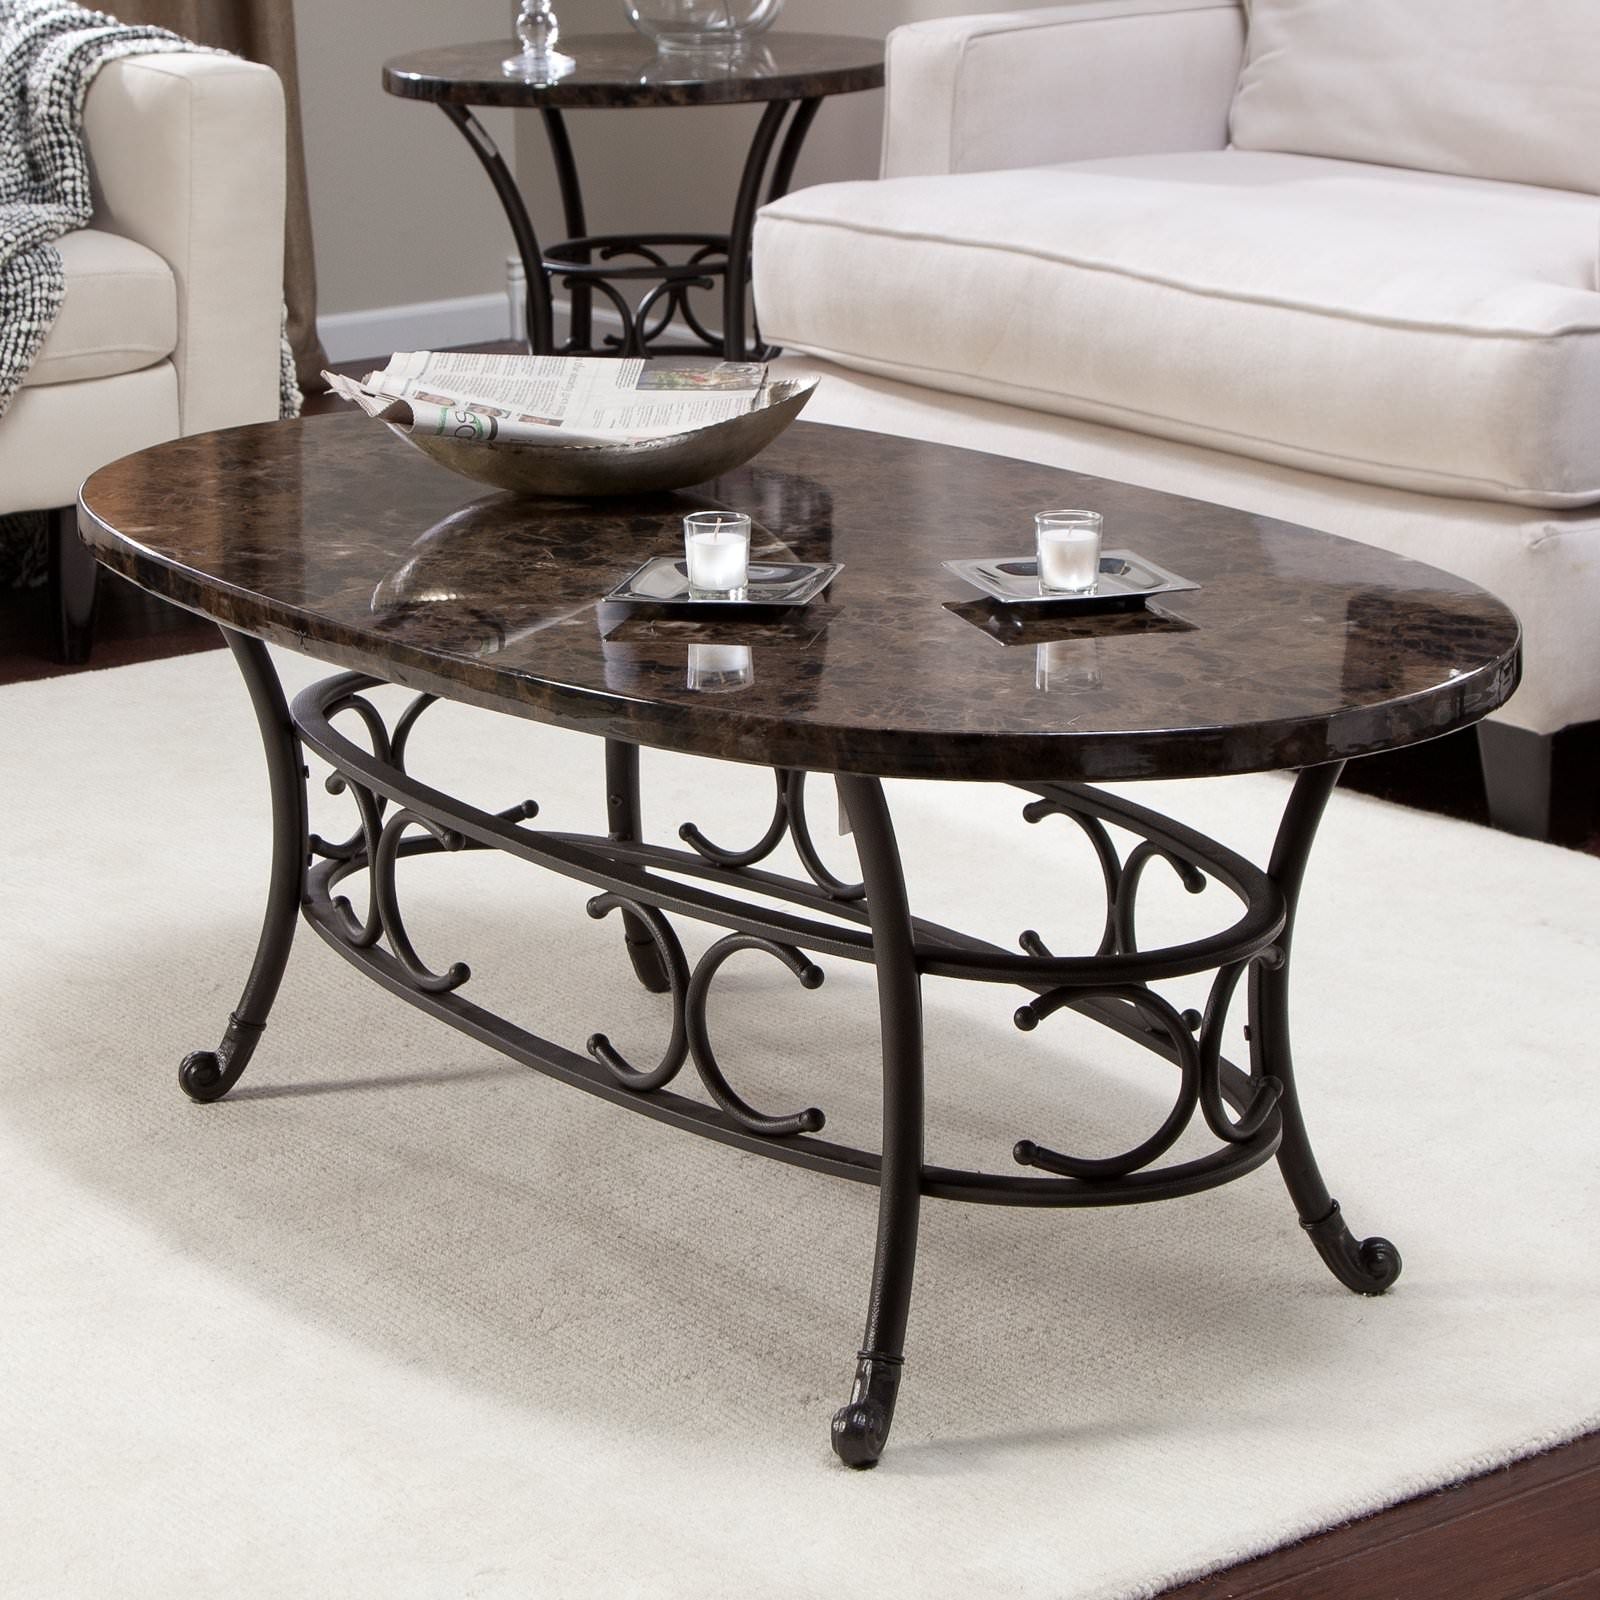 Stylish Faux Marble Coffee Table — Sushi Ichimura Decor Regarding Alcide Rectangular Marble Coffee Tables (View 14 of 30)